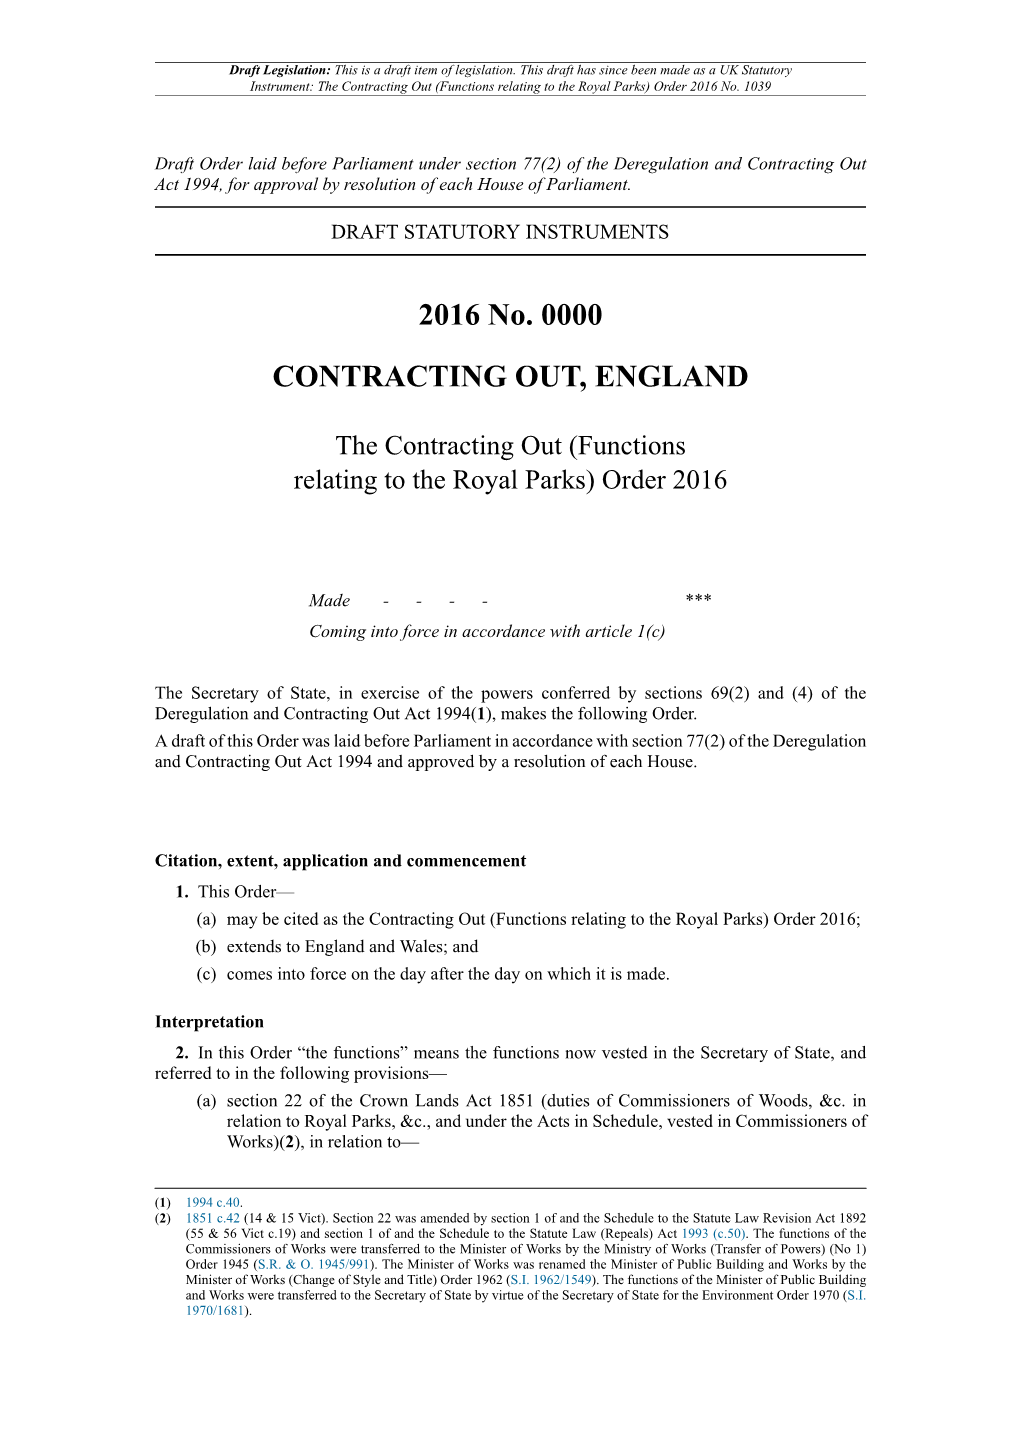 The Contracting out (Functions Relating to the Royal Parks) Order 2016 No